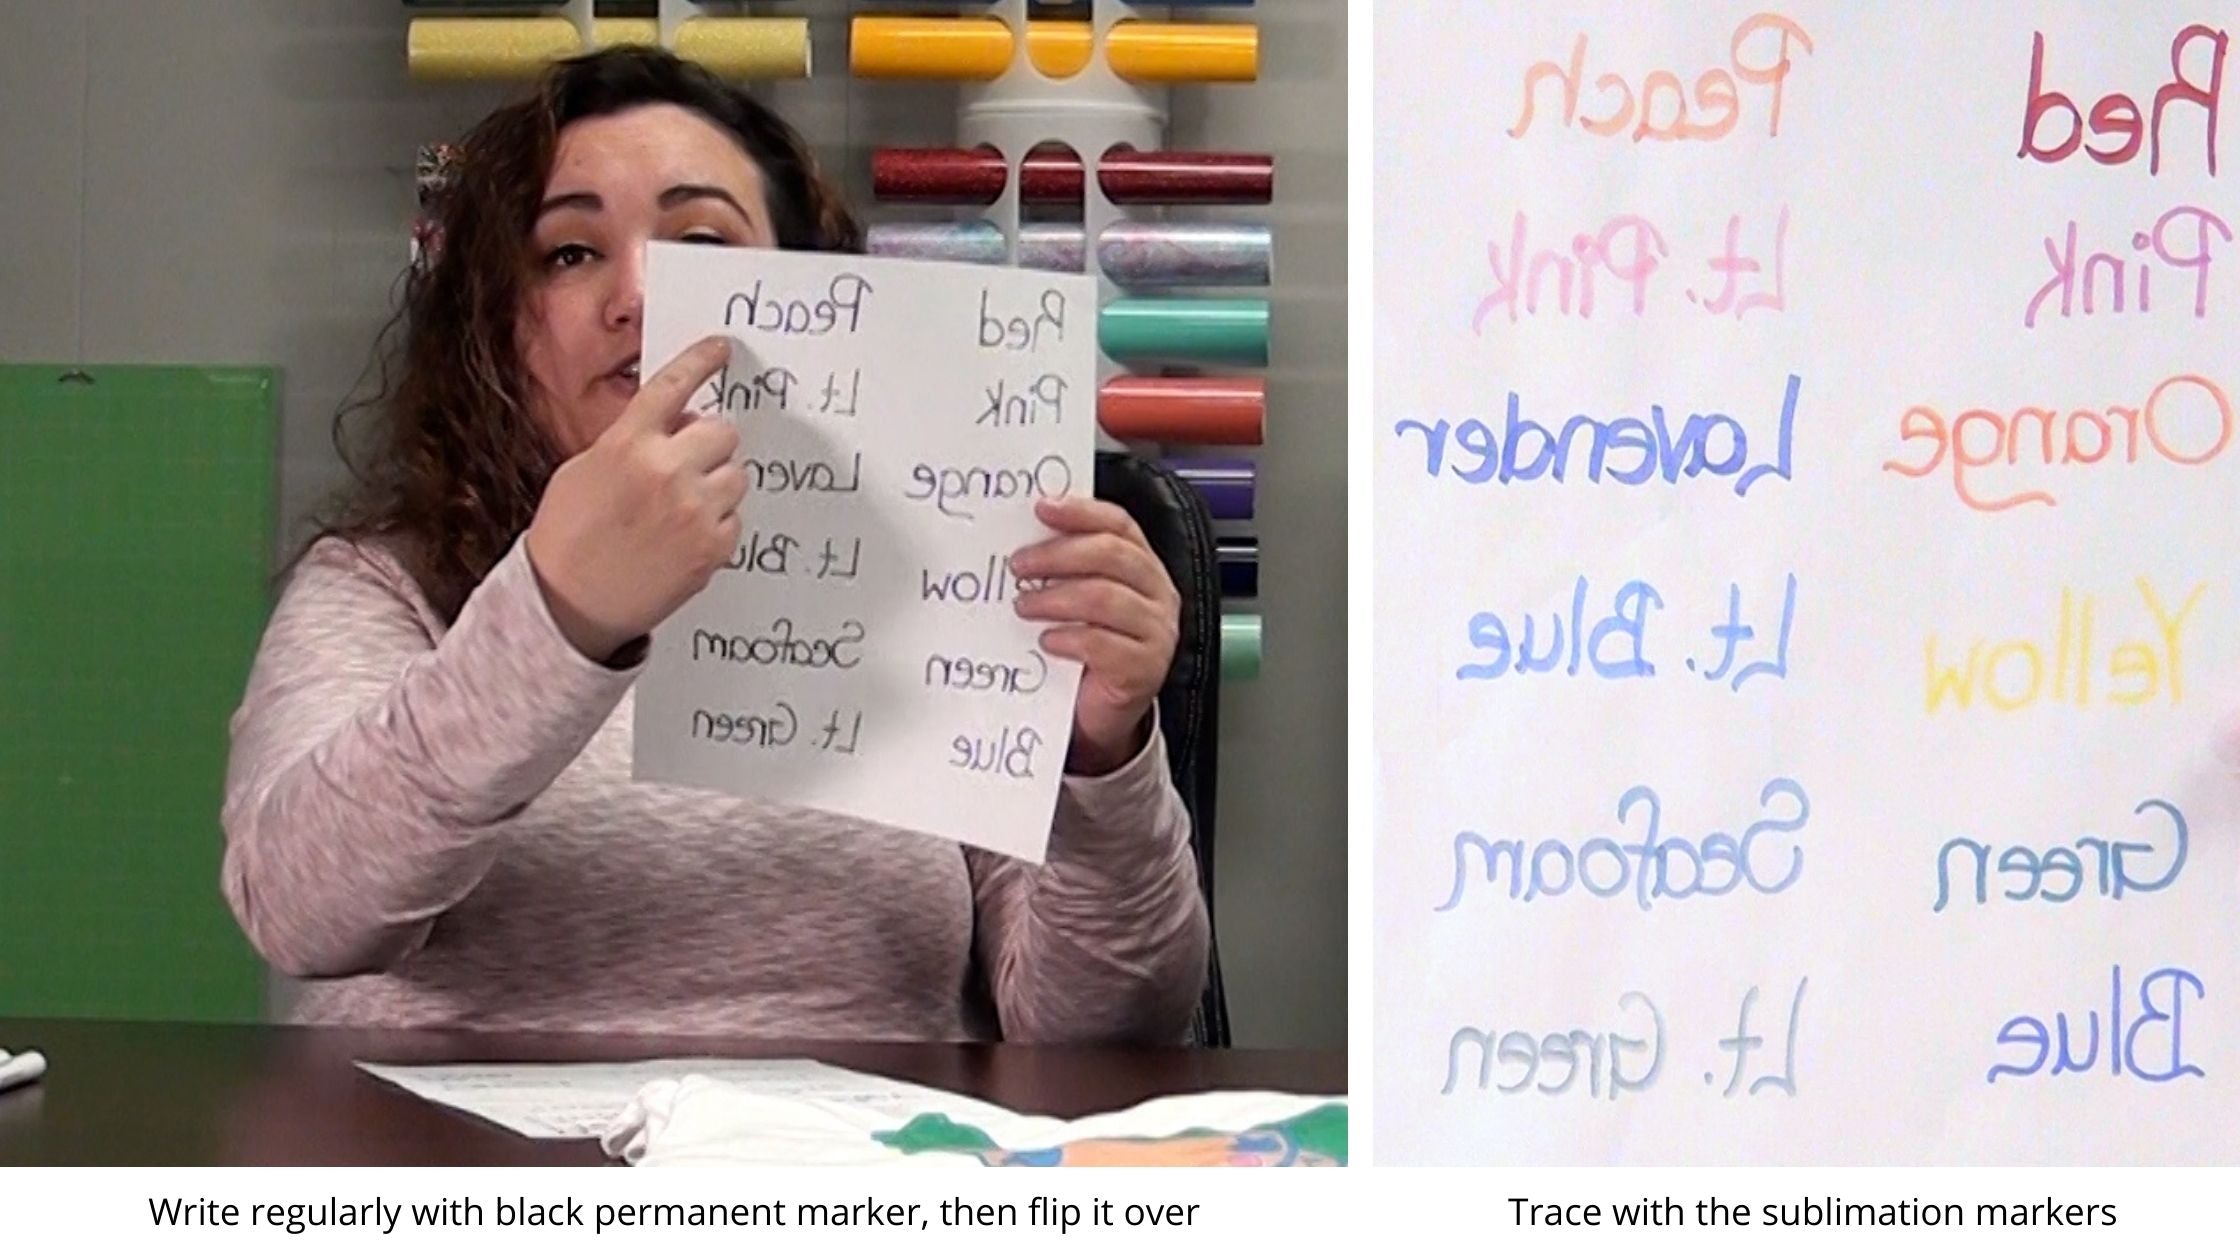 A handy trick shows how to write backwards with our sublimation markers: On a separate sheet of paper, write regularly with a black permanent marker, then flip it over, and trace with the sublimation markers